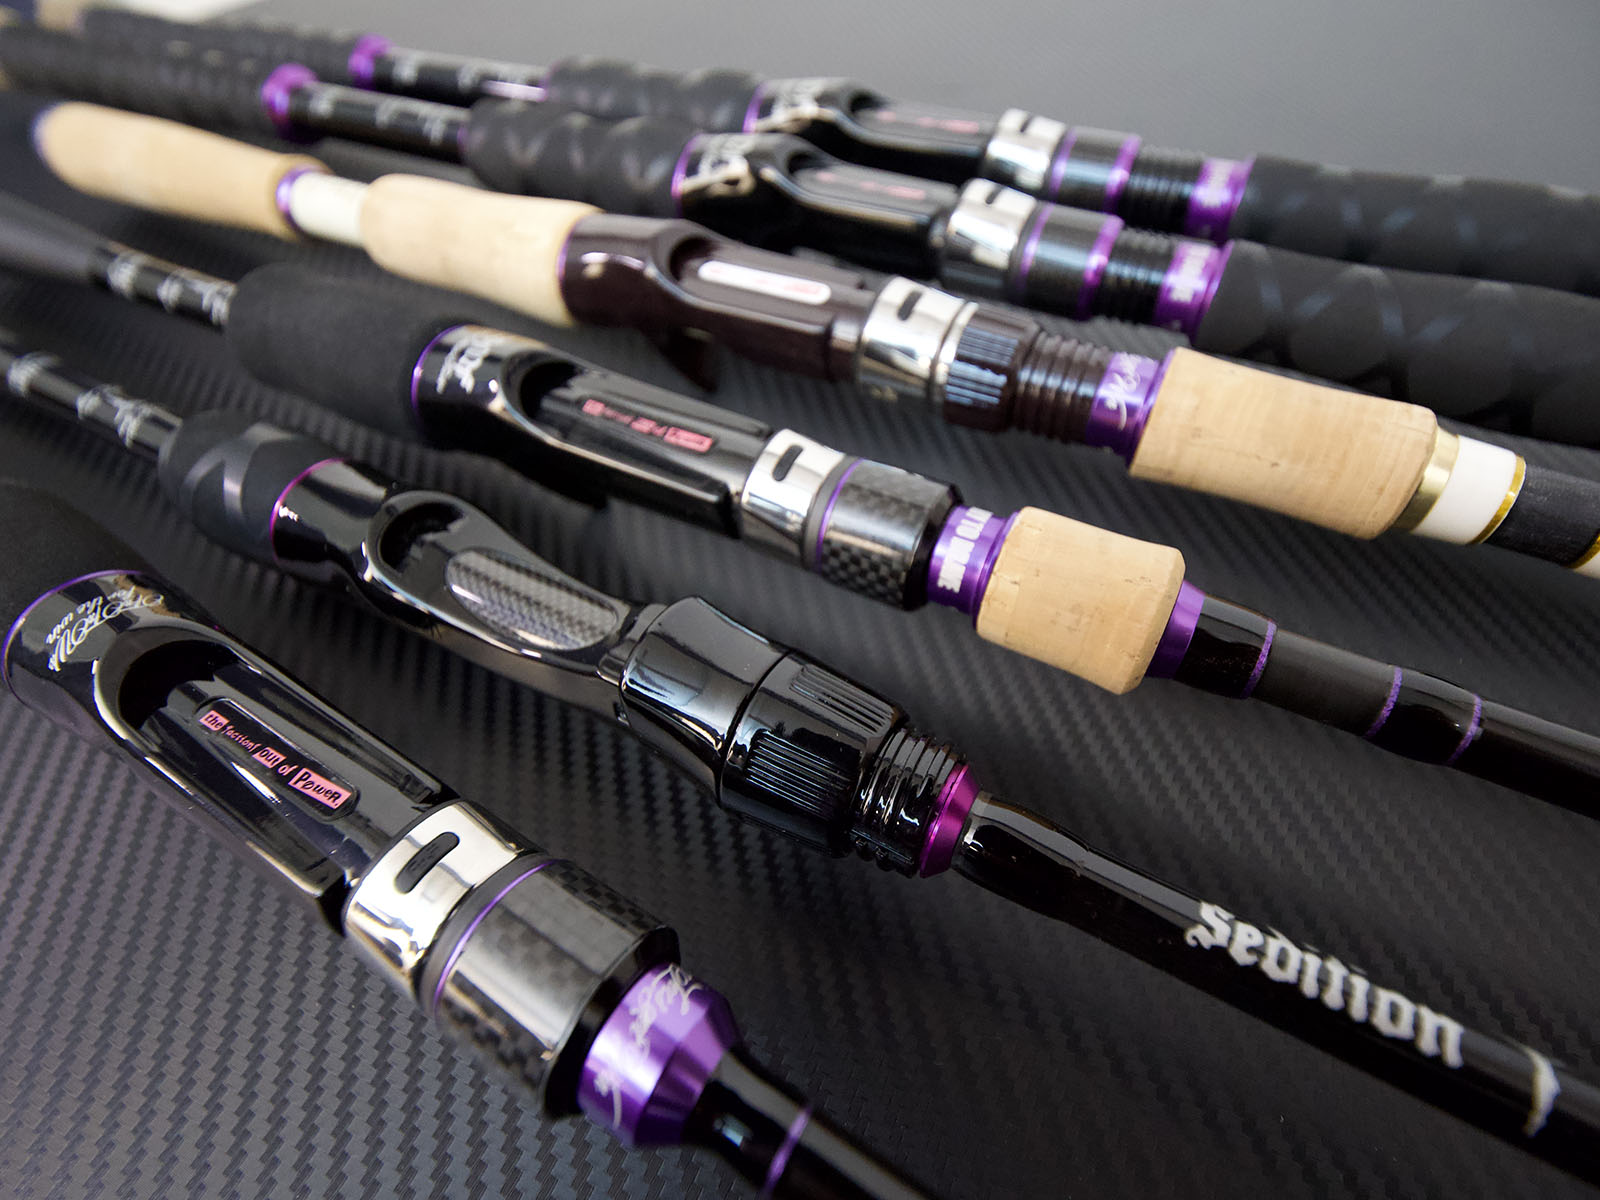 fishig rod, fishig rod Suppliers and Manufacturers at